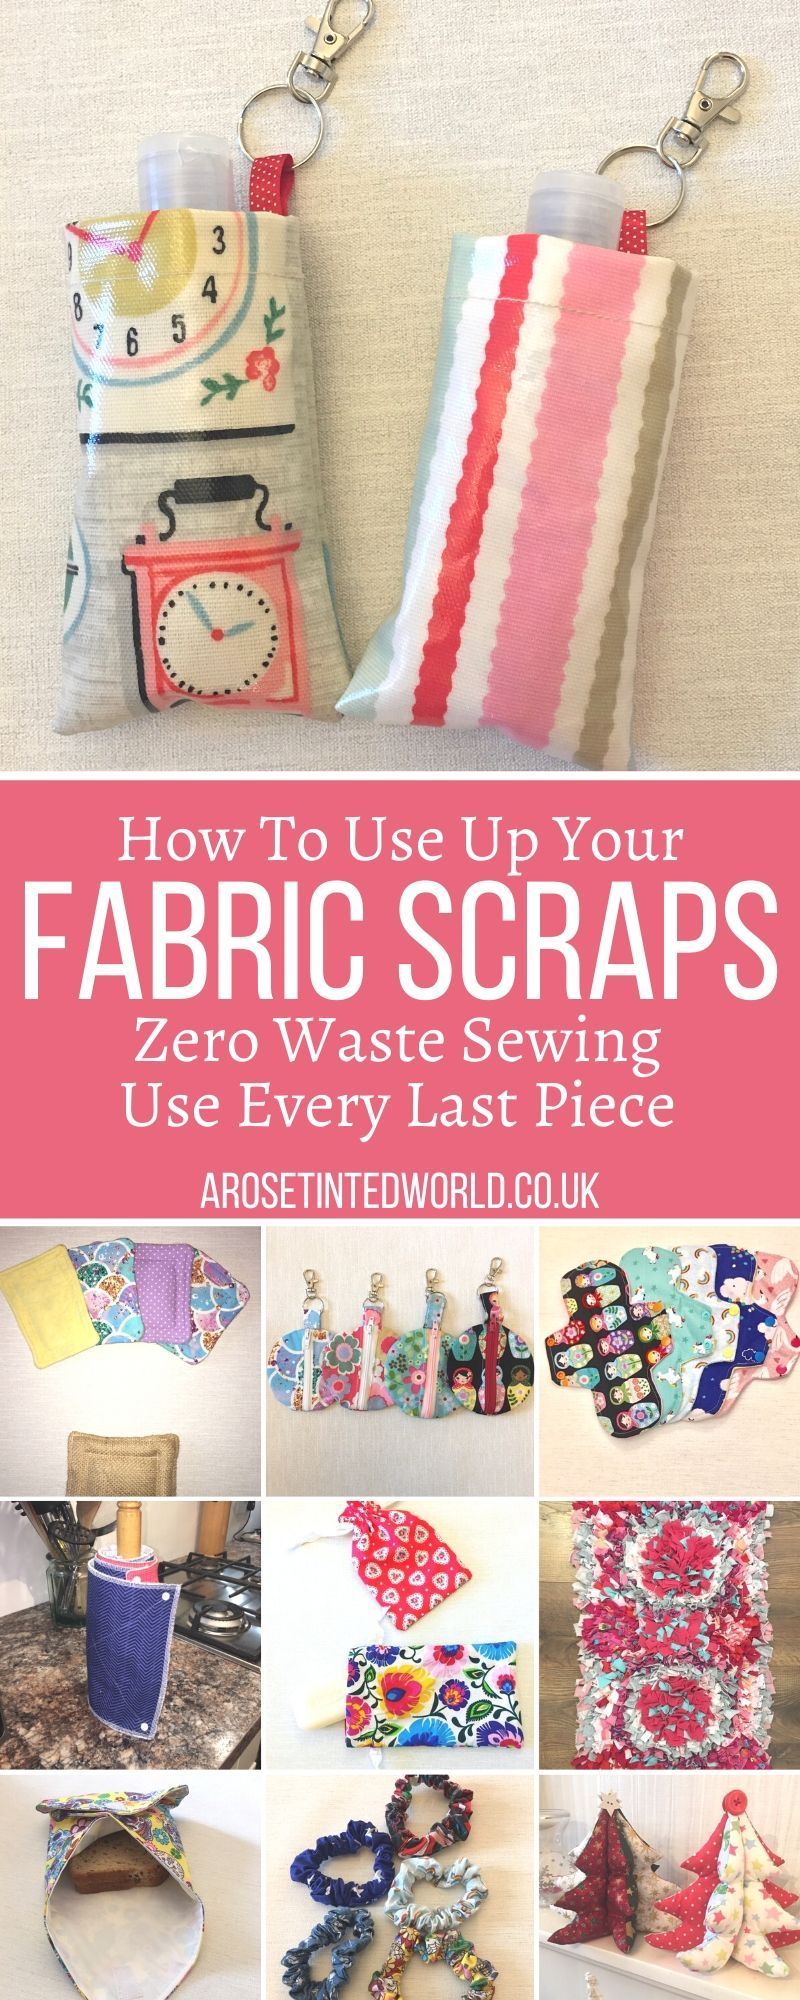 19 fabric crafts things to make ideas